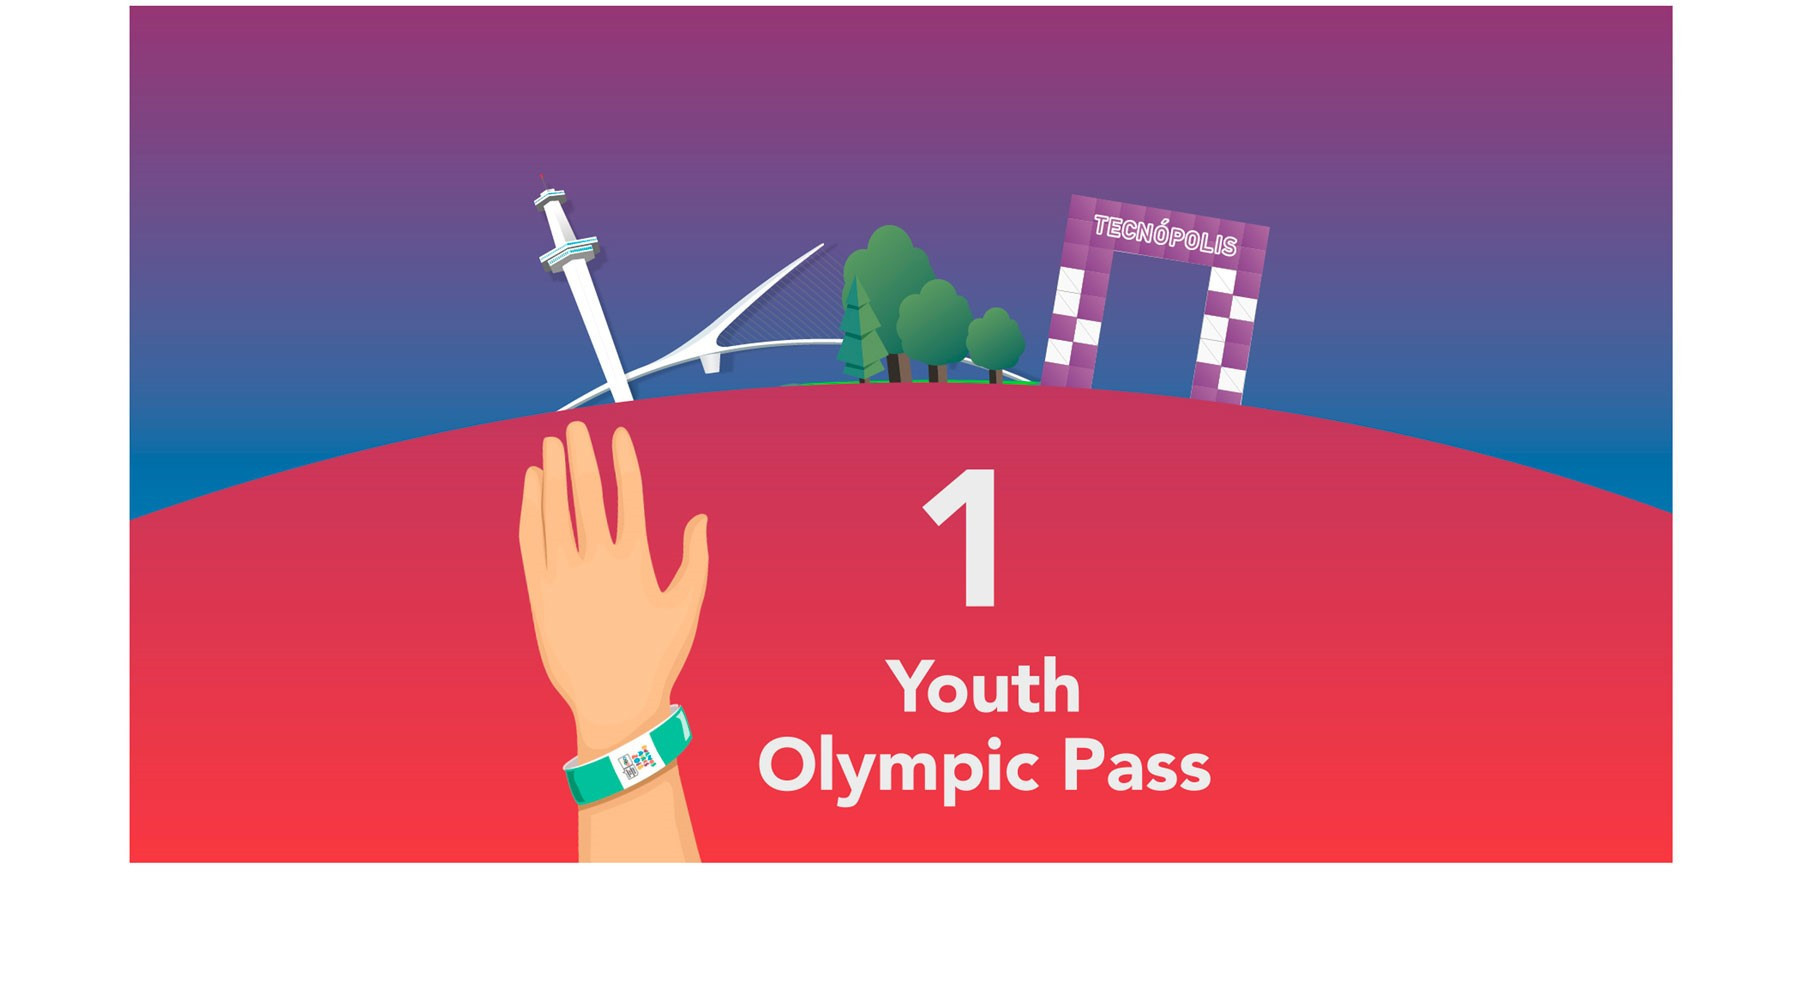 Buenos Aires 2018 set to open registration for Youth Olympic Pass